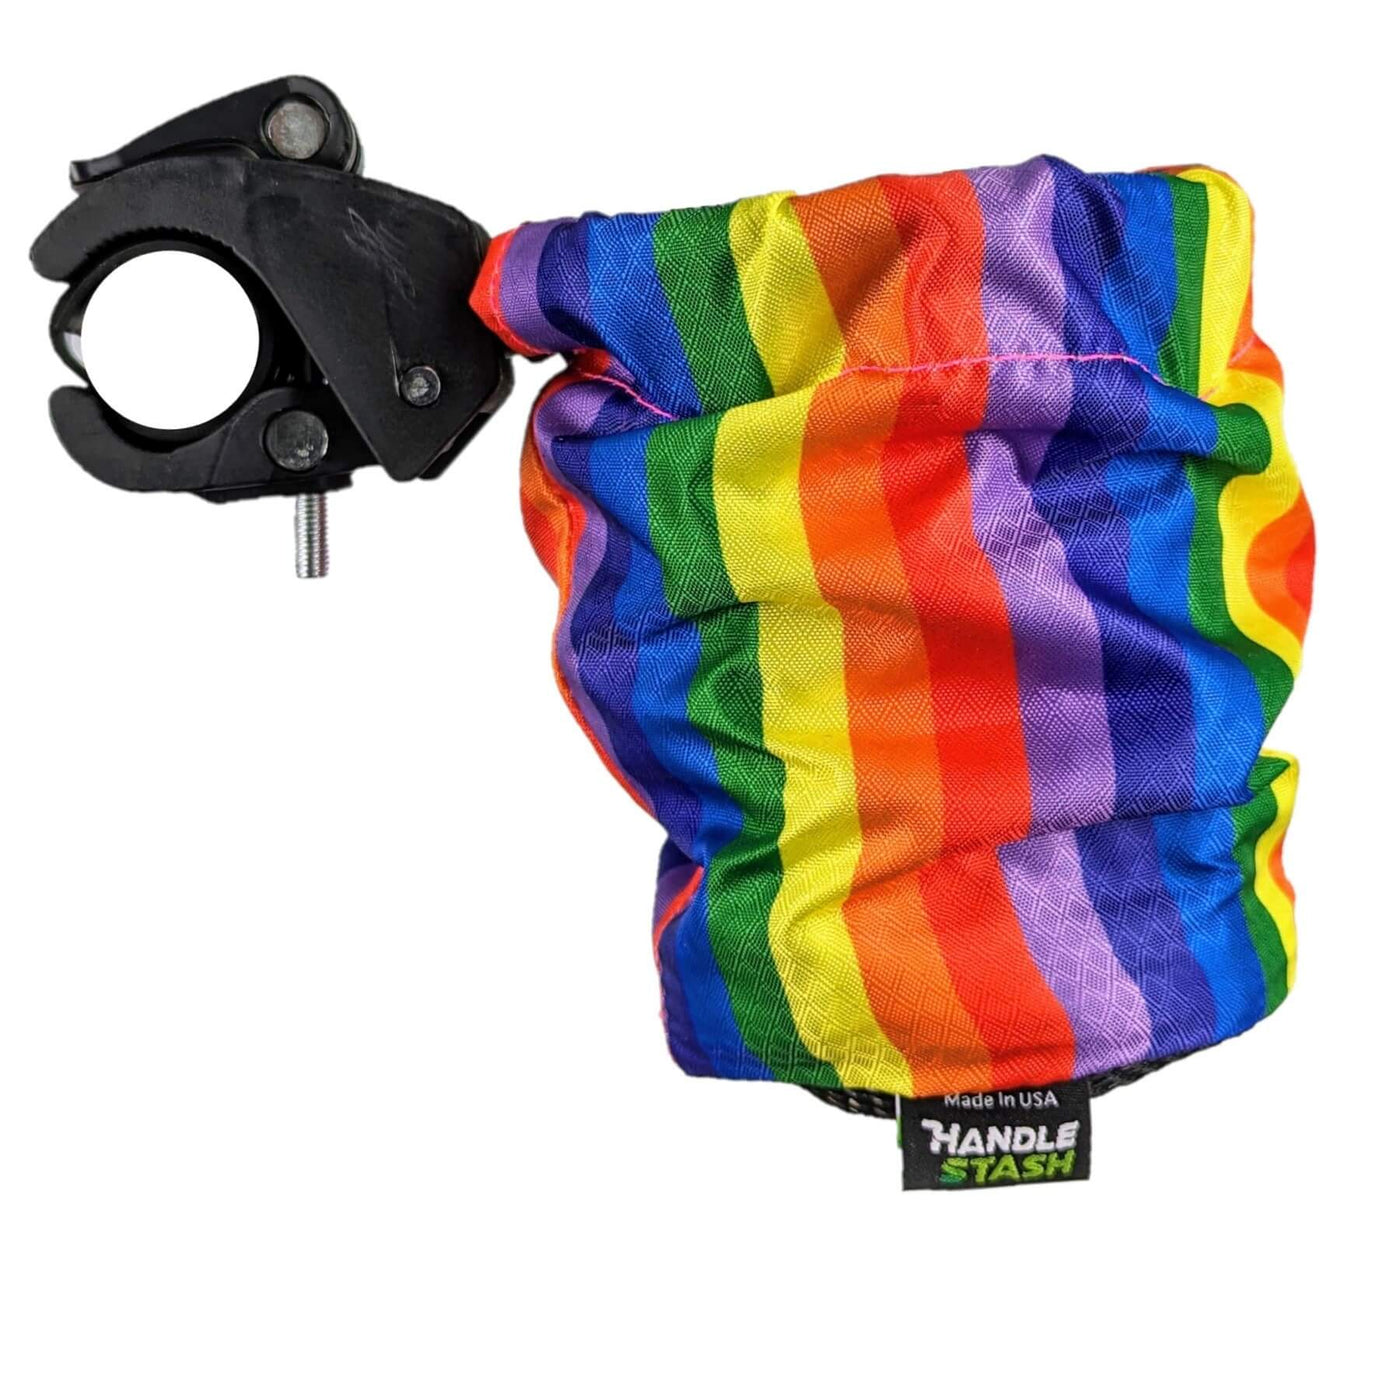 Rainbow bike cup holder in down position